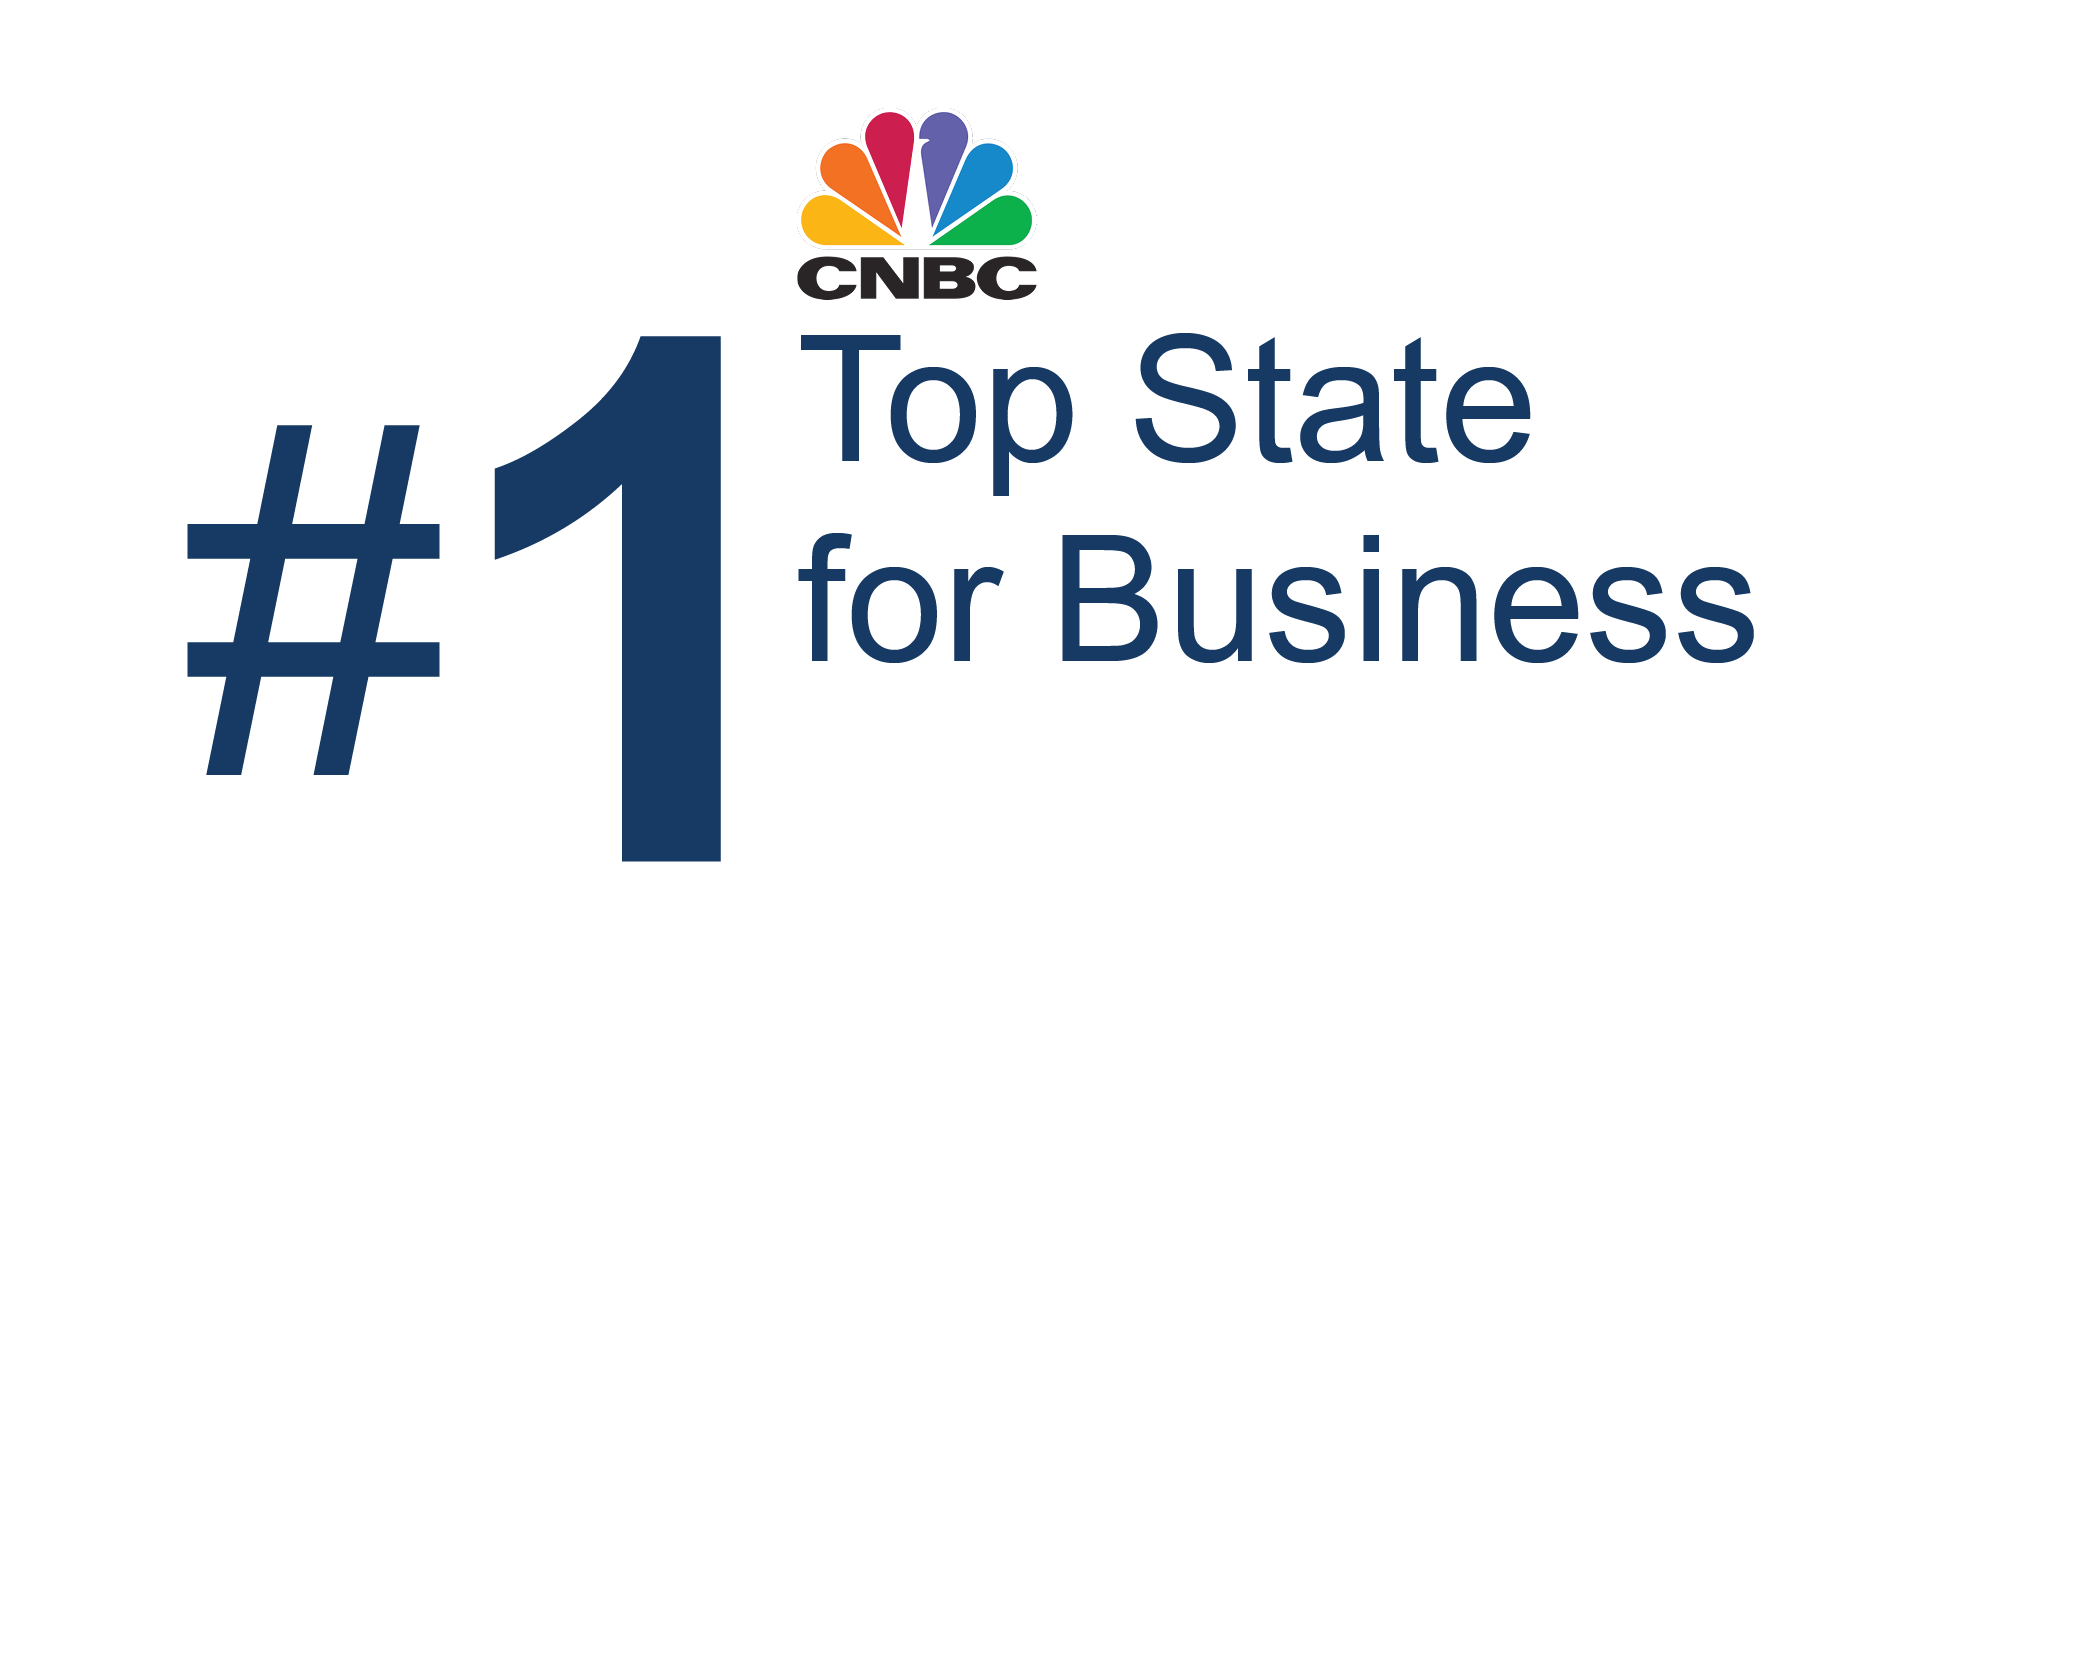 #1 Top State for Business